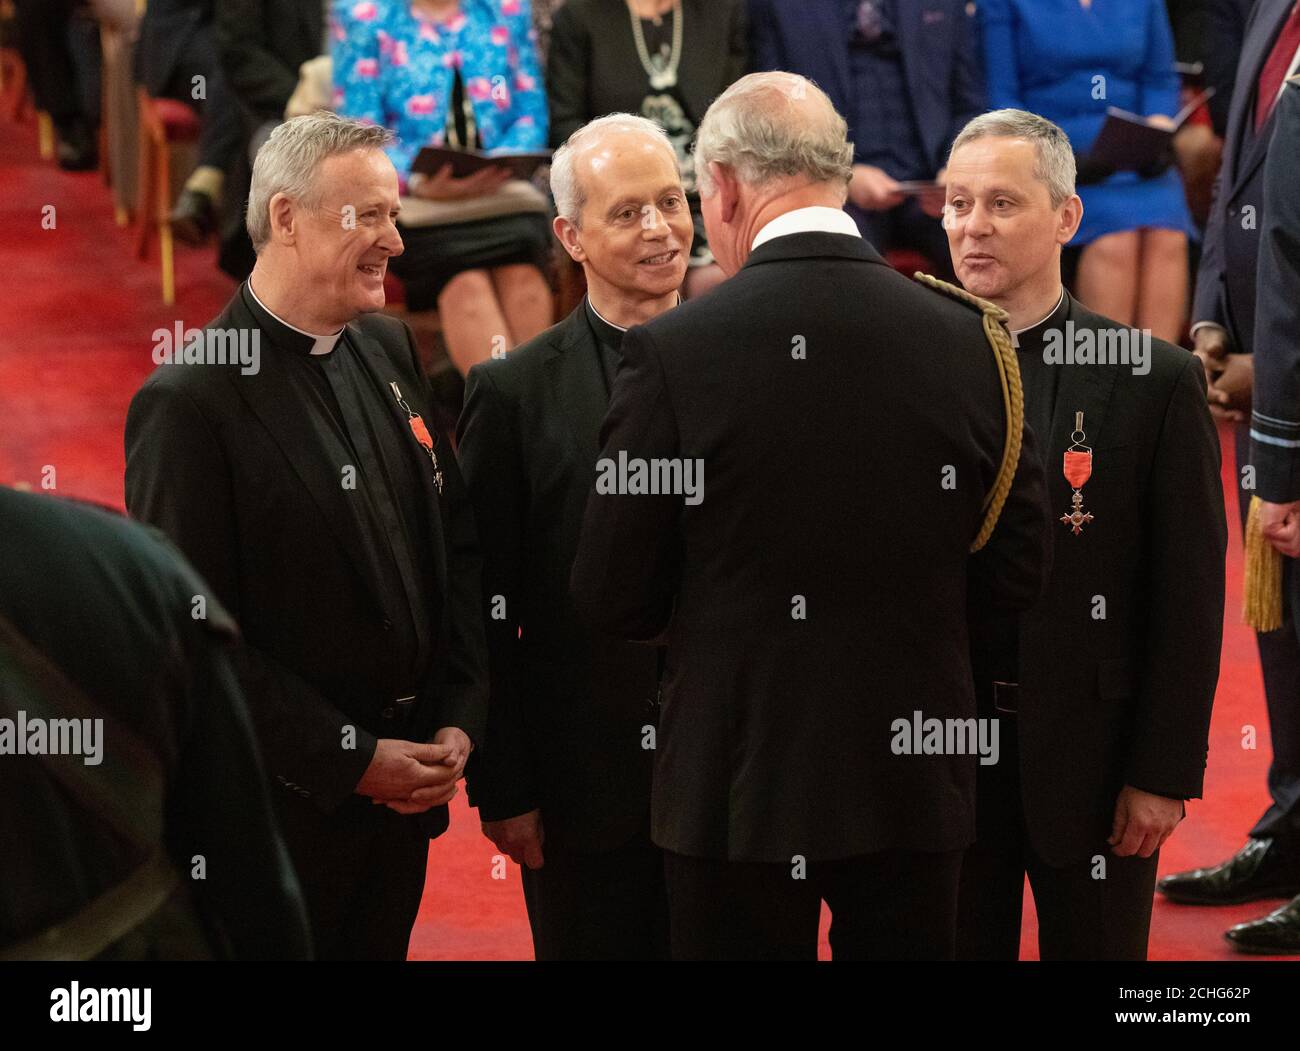 Classical music group the Priests, the Very Reverend David Delargy, the Reverend Eugene O'Hagan and the Reverend Martin O'Hagan are given their MBE (Member of the Order of the British Empire) medals by the Prince of Wales during an investiture ceremony at Buckingham Palace in London. Picture date: Thursday March 5, 2020. See PA story ROYAL Investiture. Photo credit should read: Dominic Lipinski/PA Wire Stock Photo